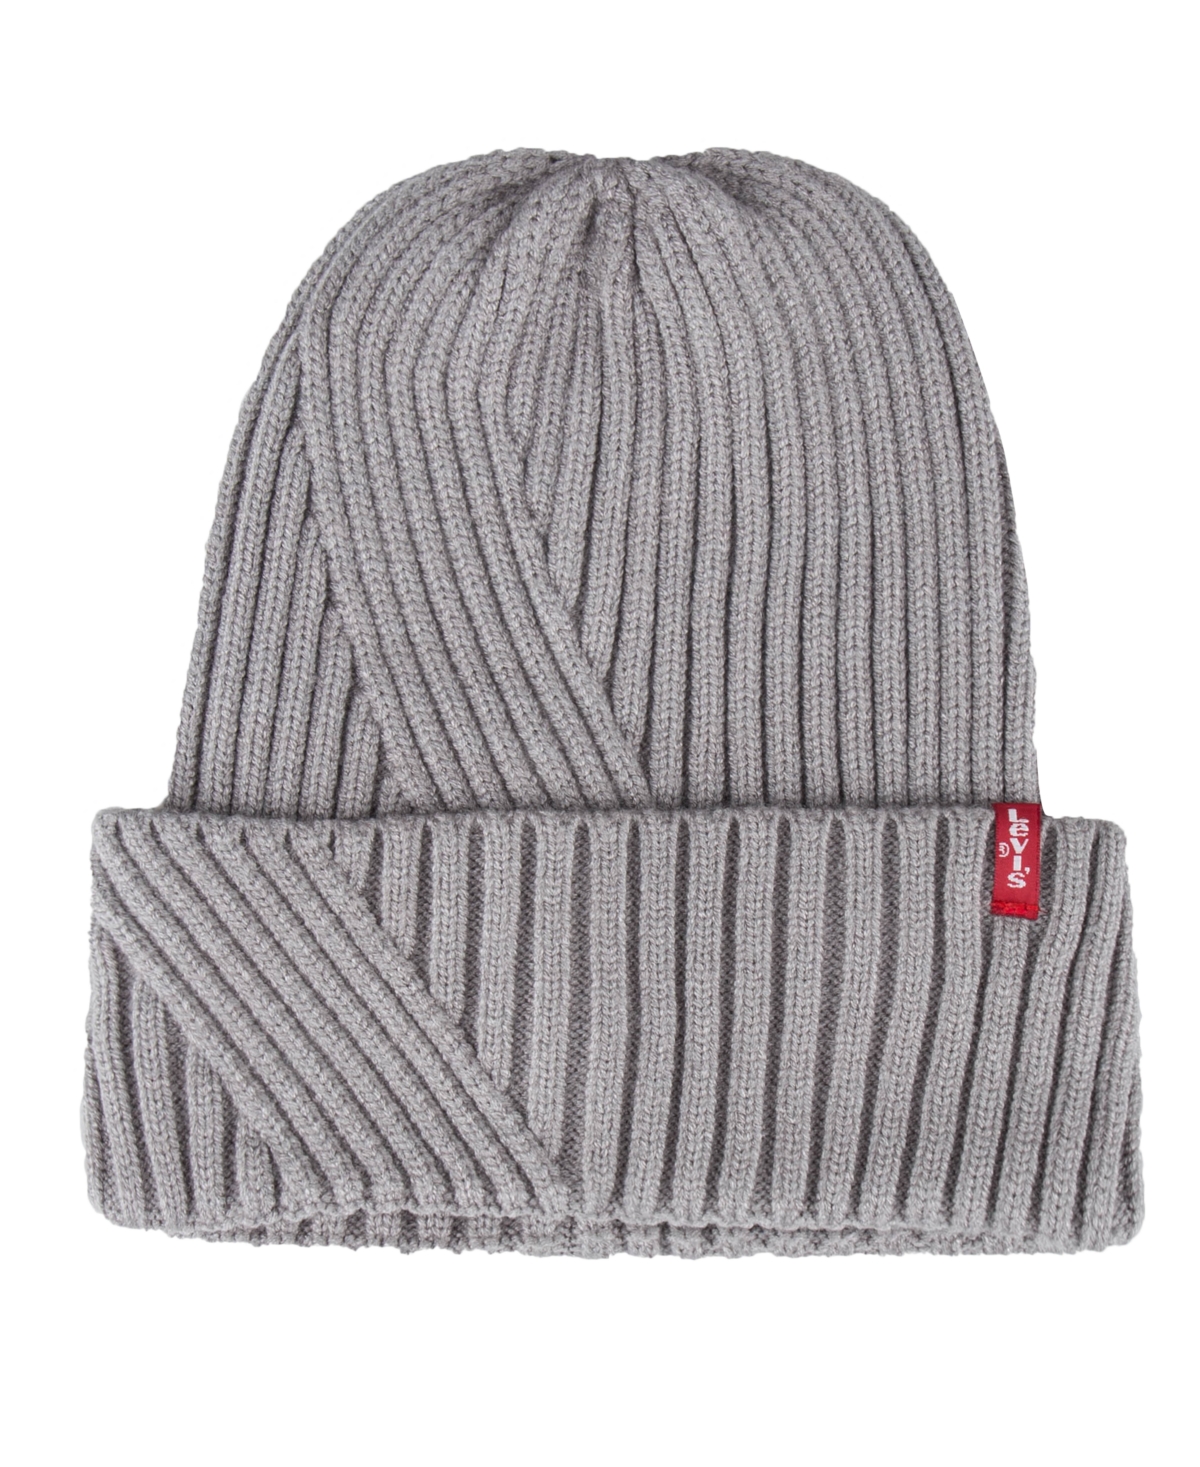 Levi's Men's Cropped Converged Rib Knit Beanie In Gray